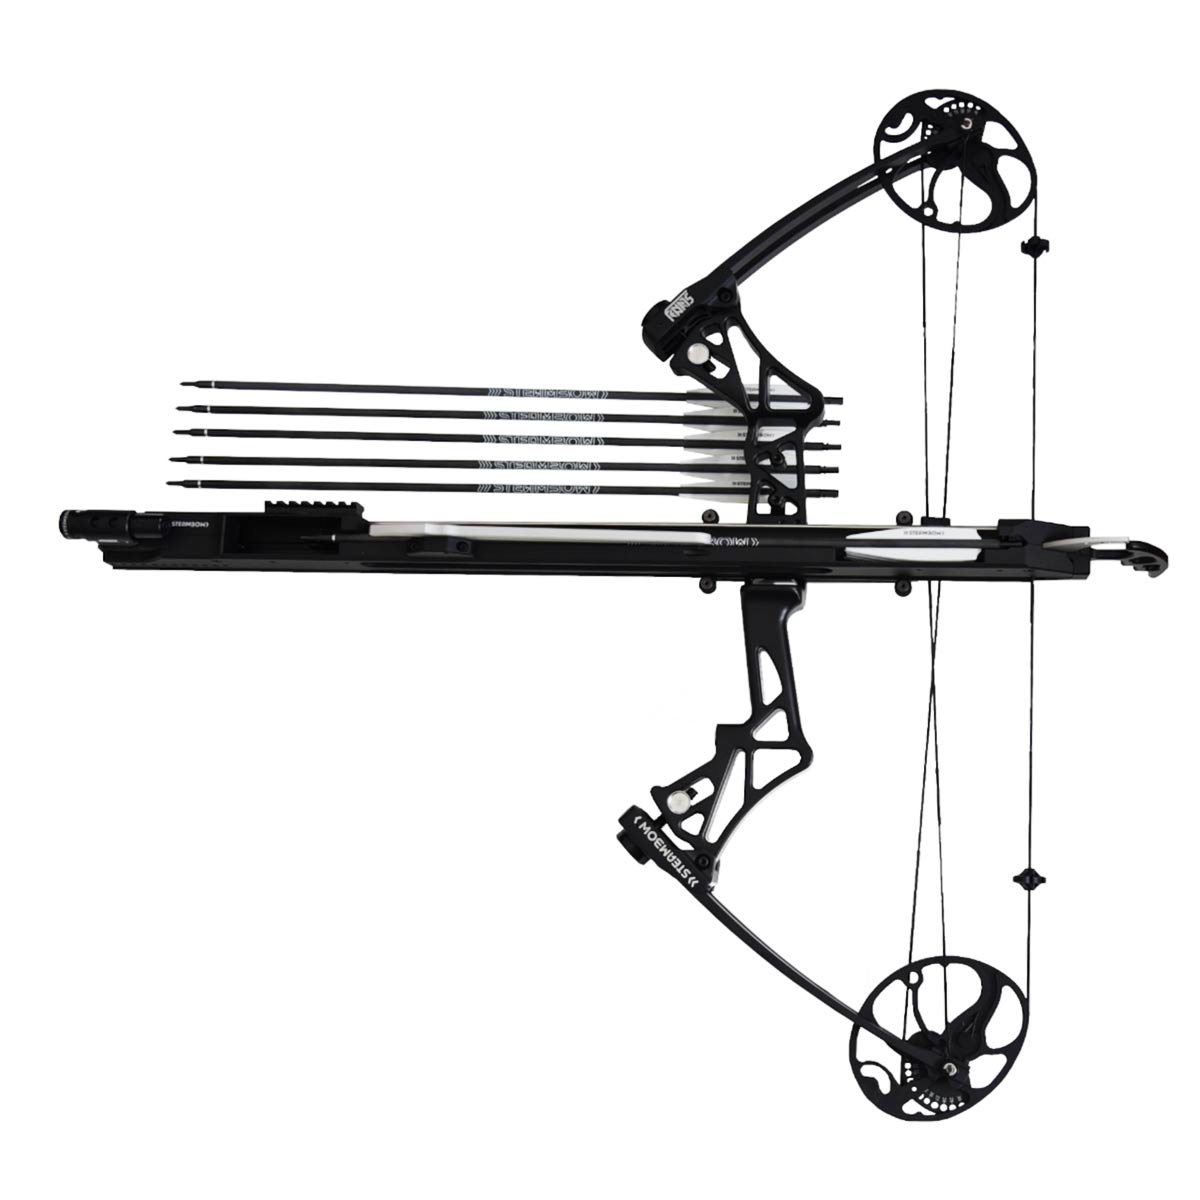 Set: Steambow FENRIS – magazine with compound bow ”M1″ – Steambow GmbH